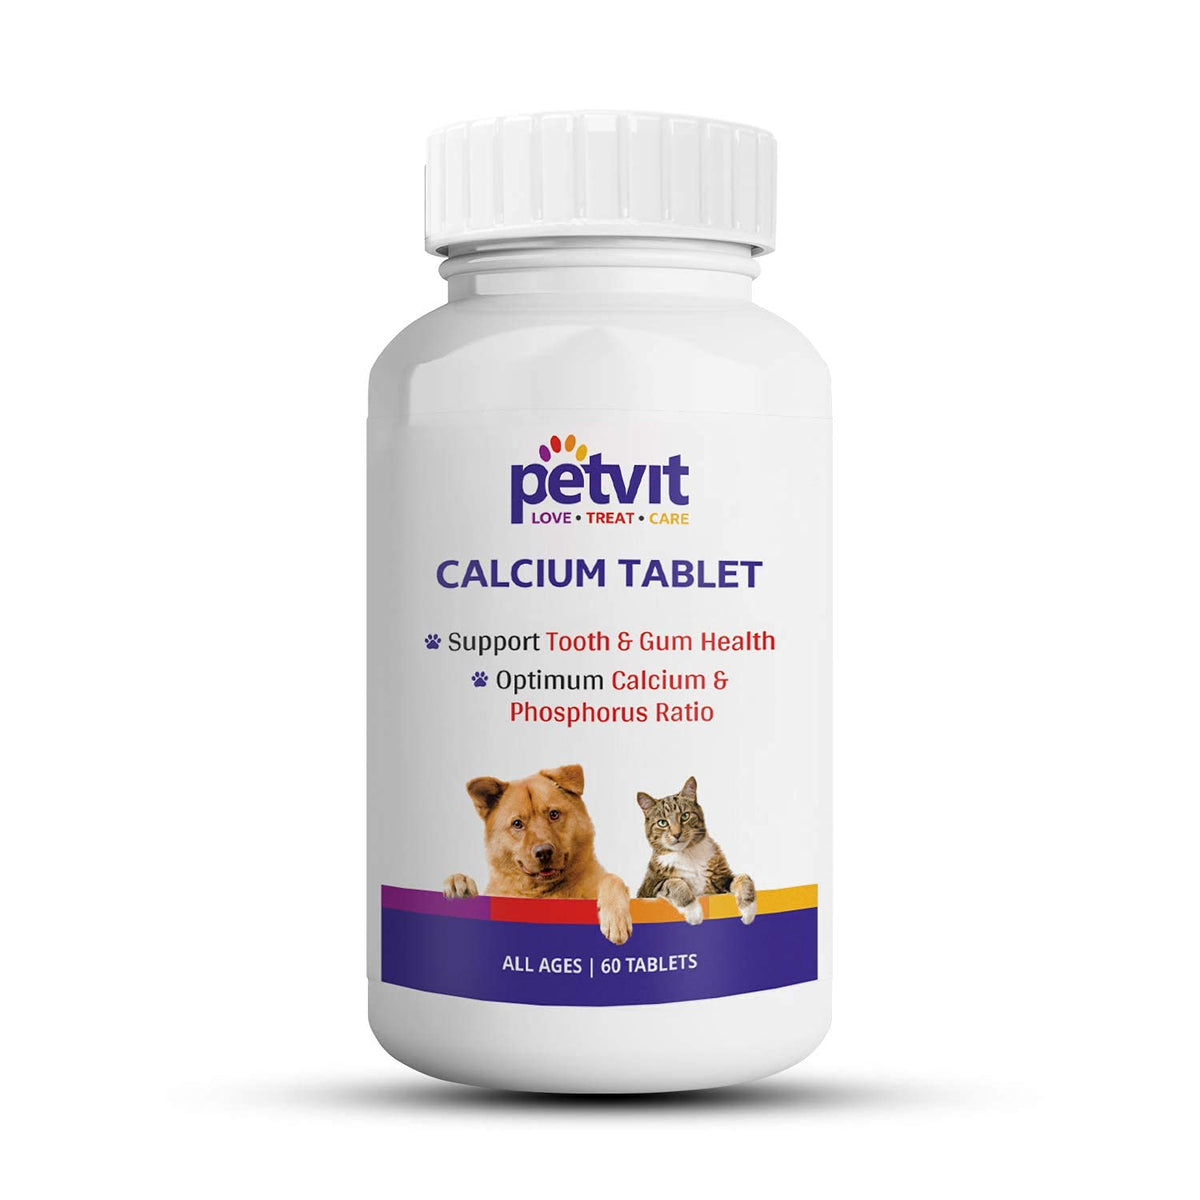 Petvit Calcium Tablet with Calcium, Phosphorus, Vitamin D3 & Vitamin B12 for Dog and Cat for Stronger Bones, Teeth & Growth in Pet for All Age Group – 60 Palatable Chewable Tablets